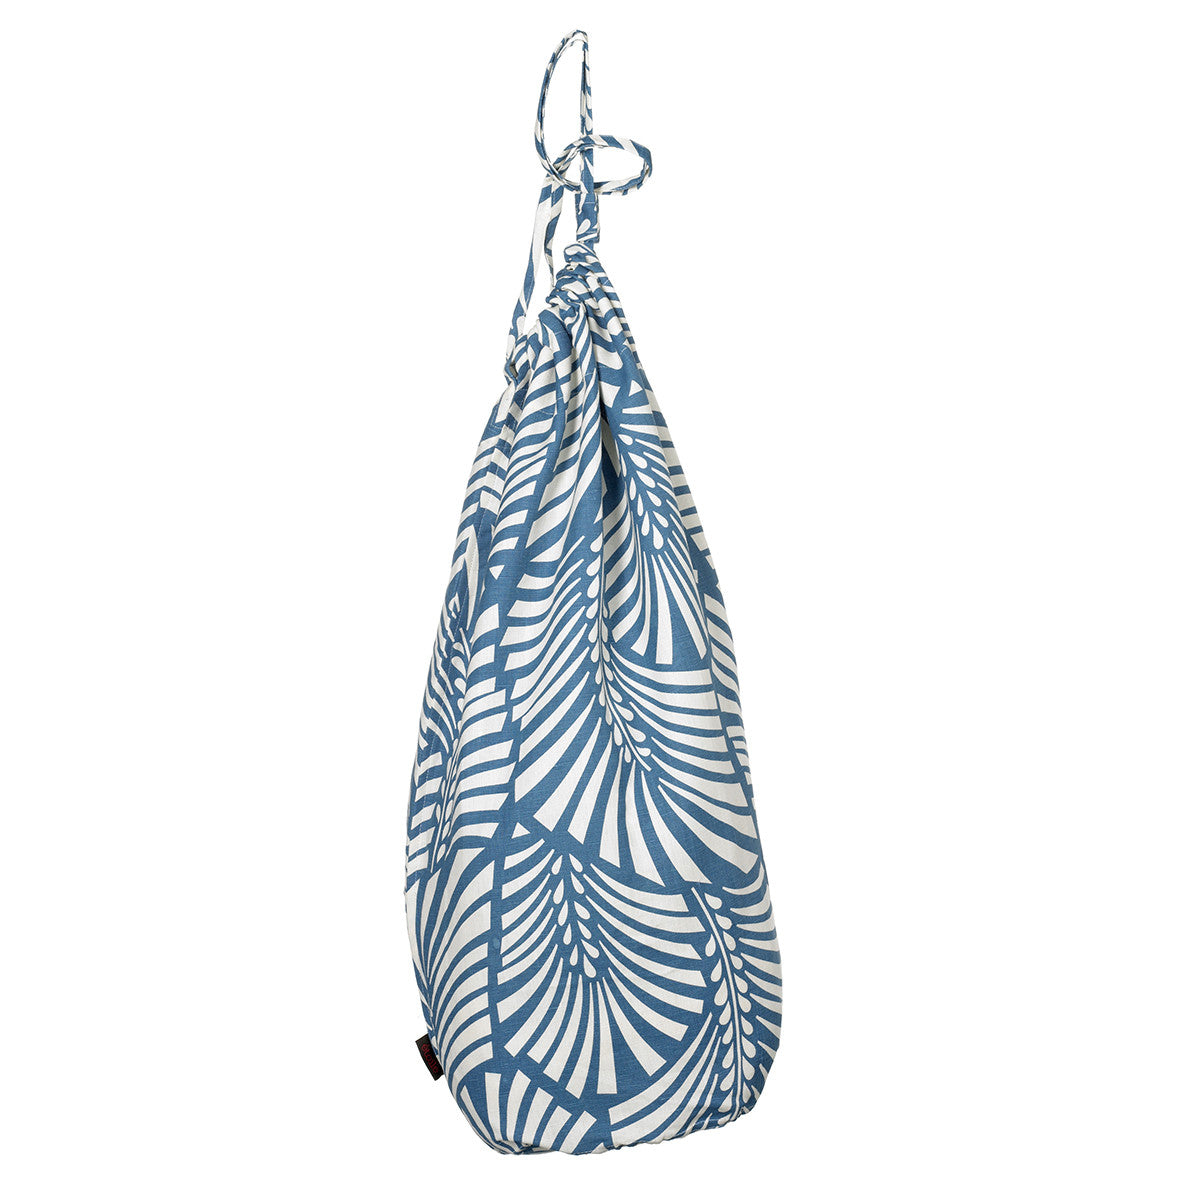 Oscar Palm Leaf Pattern Printed Linen Cotton Drawstring Laundry & Storage Bags in Petrol (Navy) Blue Ships from Canada (USA) 